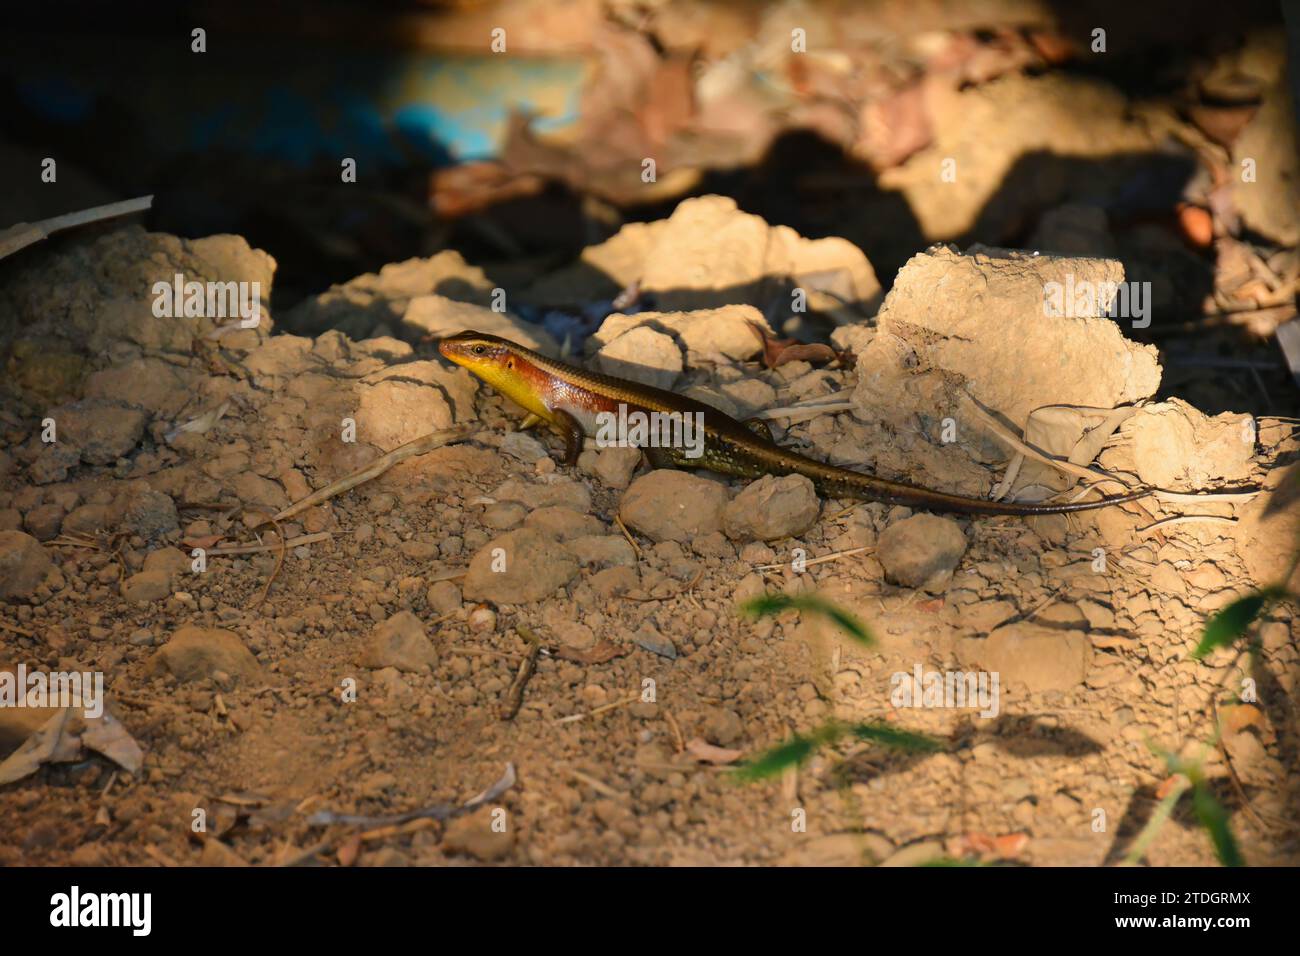 Eutropis multifasciata,Mabuya,This is the name of this pretty skink, which can reach a total length of around 30 cm, Thailand Stock Photo